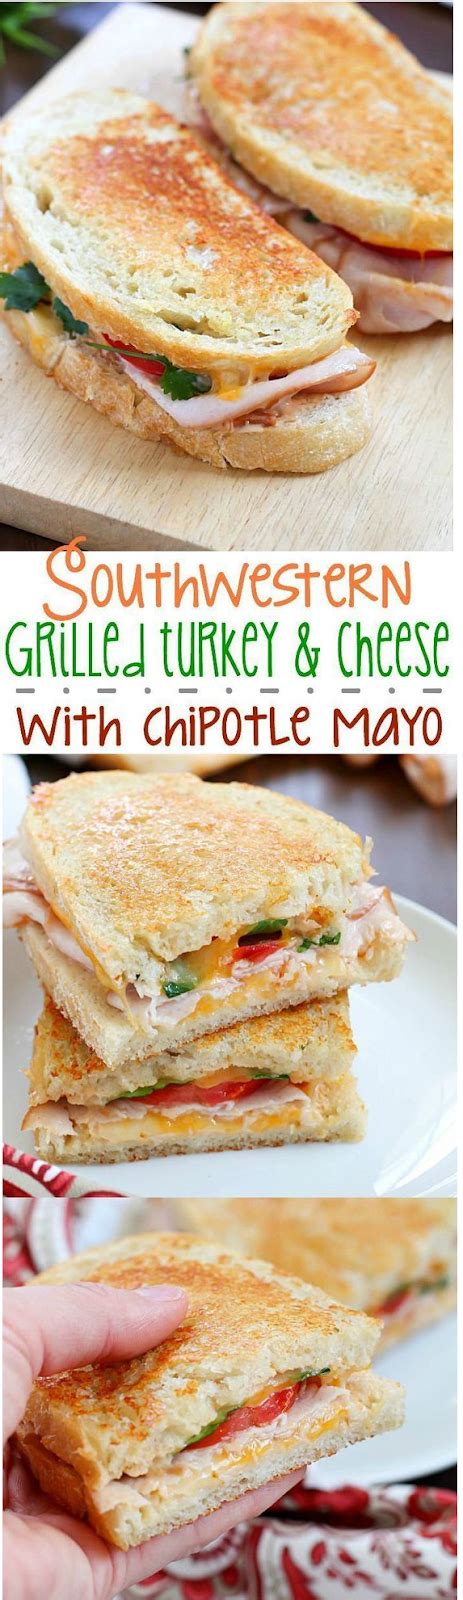 Southwestern Crispy Grilled Turkey And Cheese Sandwiches With Chipotle